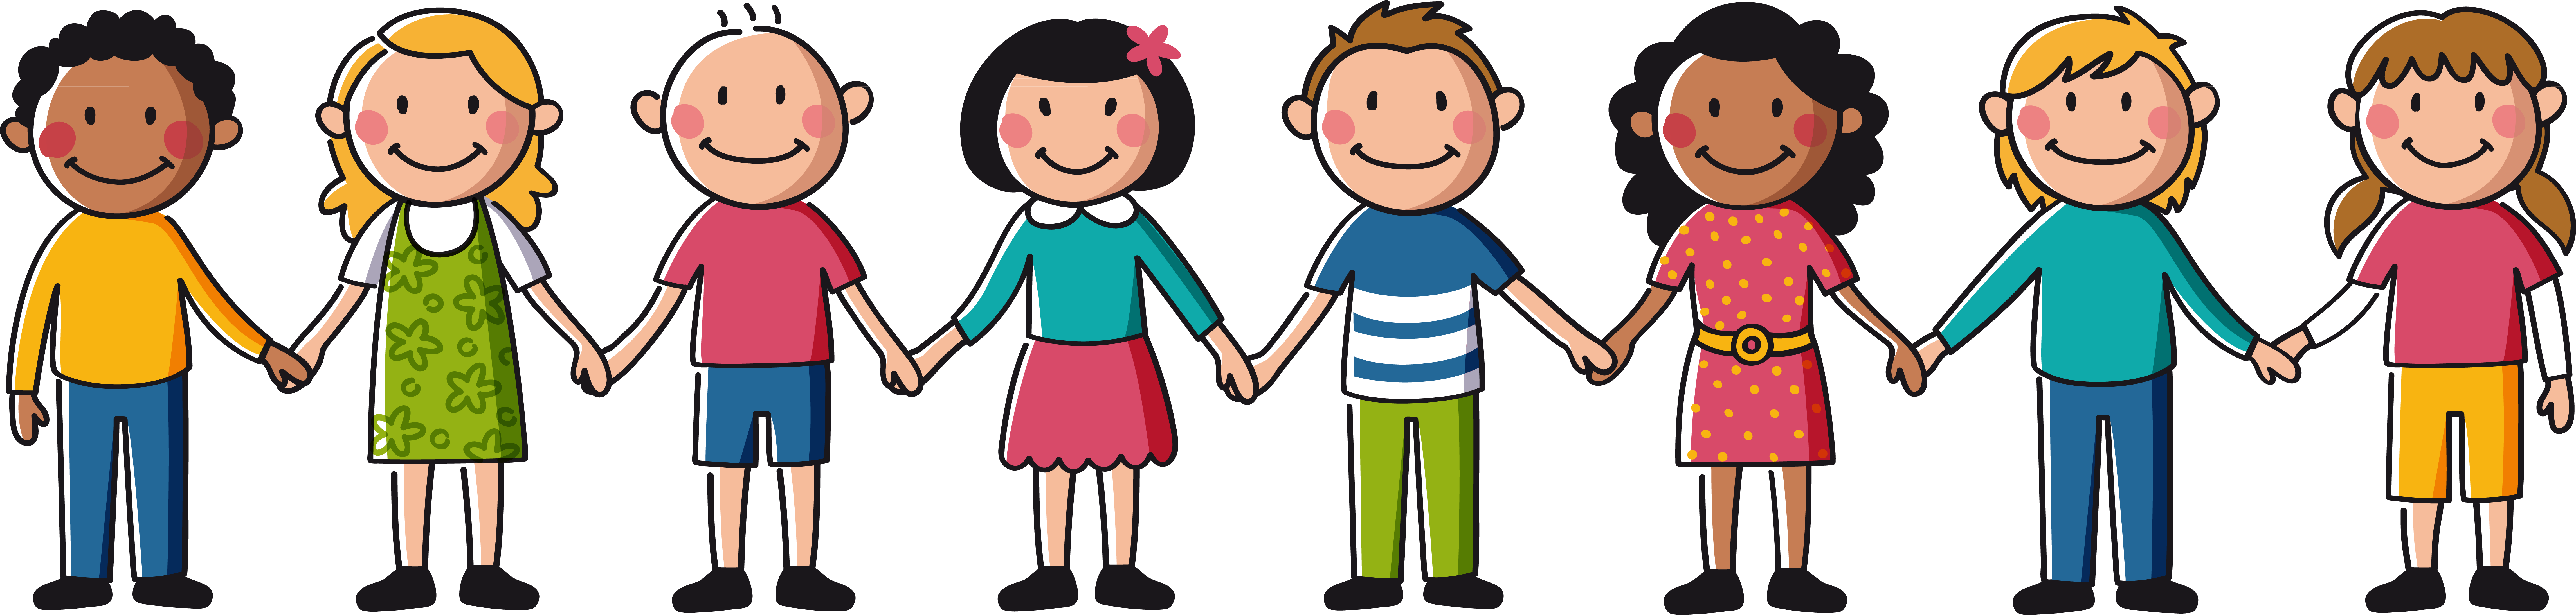 Kids Holding Hands Drawing At Getdrawings - Kids Holding Hands (9158x2188)